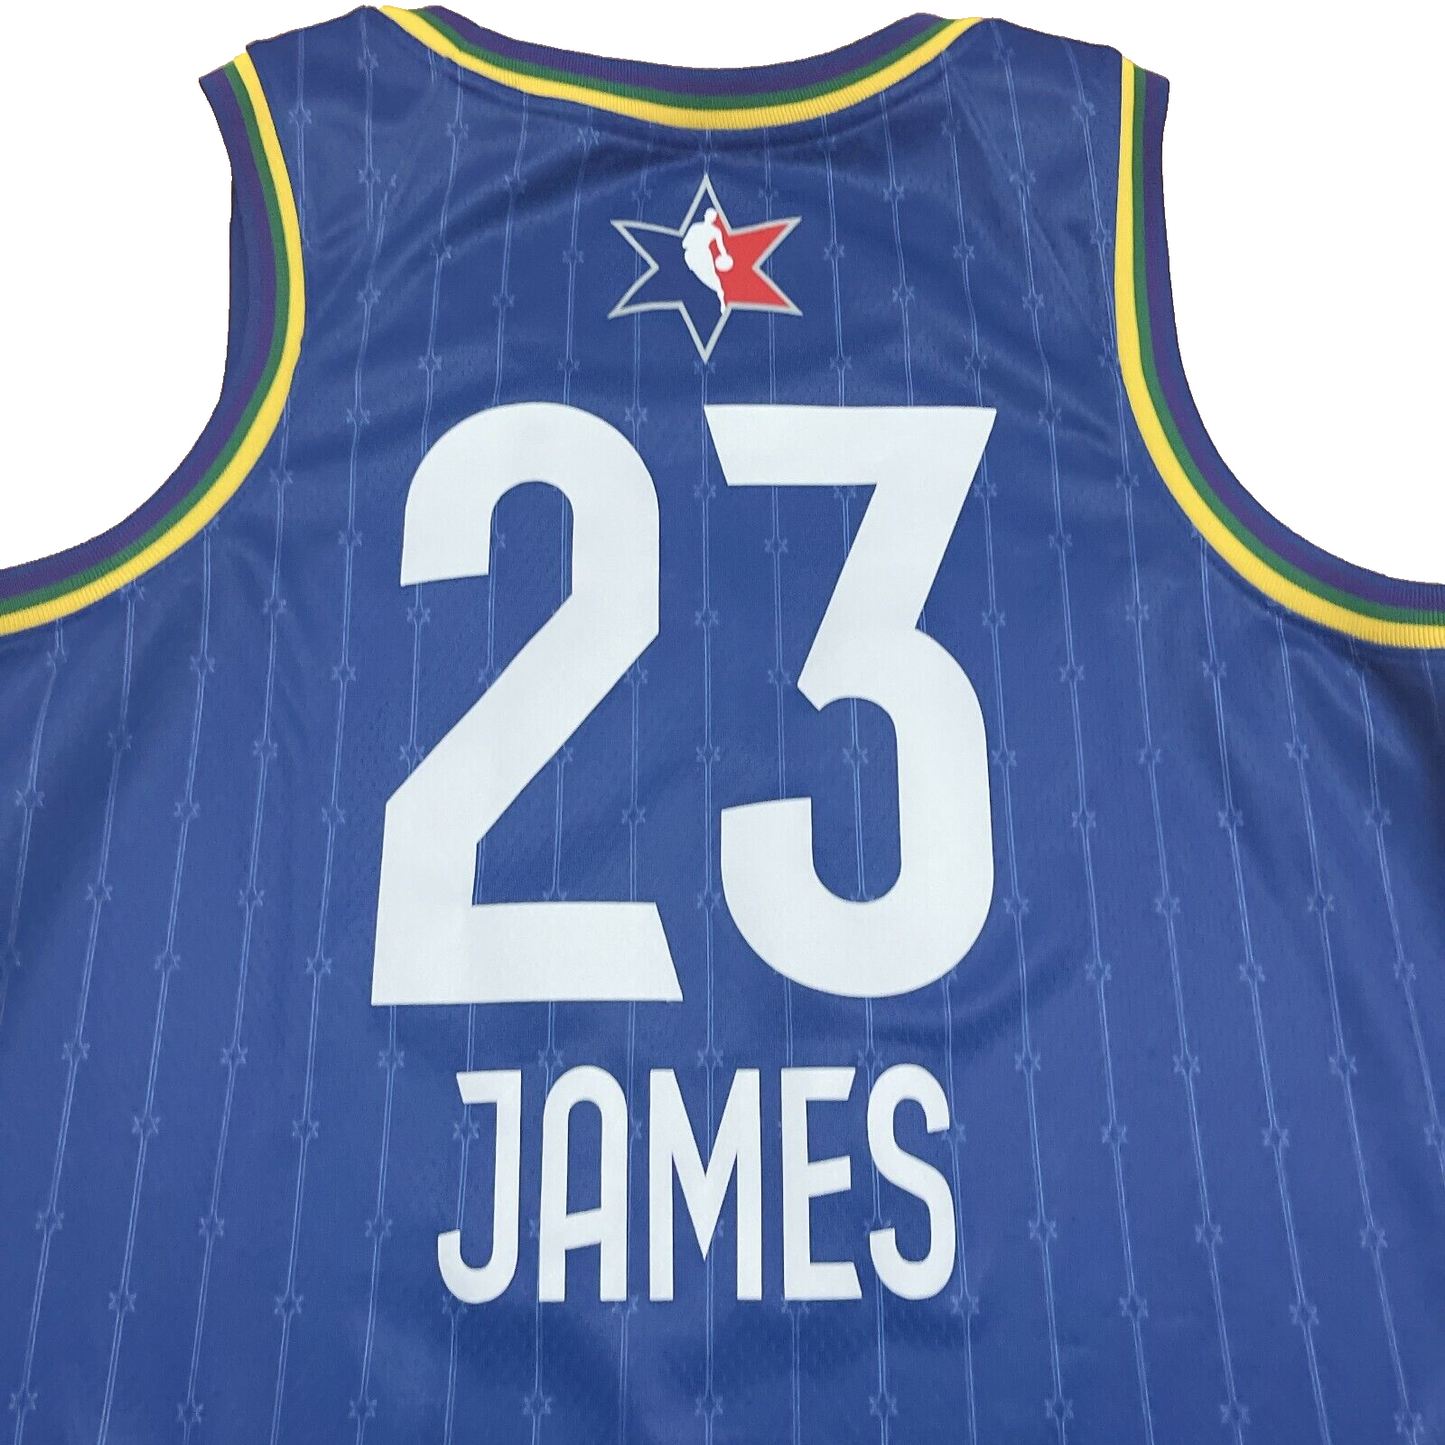 100% Authentic Lebron James 2020 NBA All Star Game Jersey Size M 44 Mens